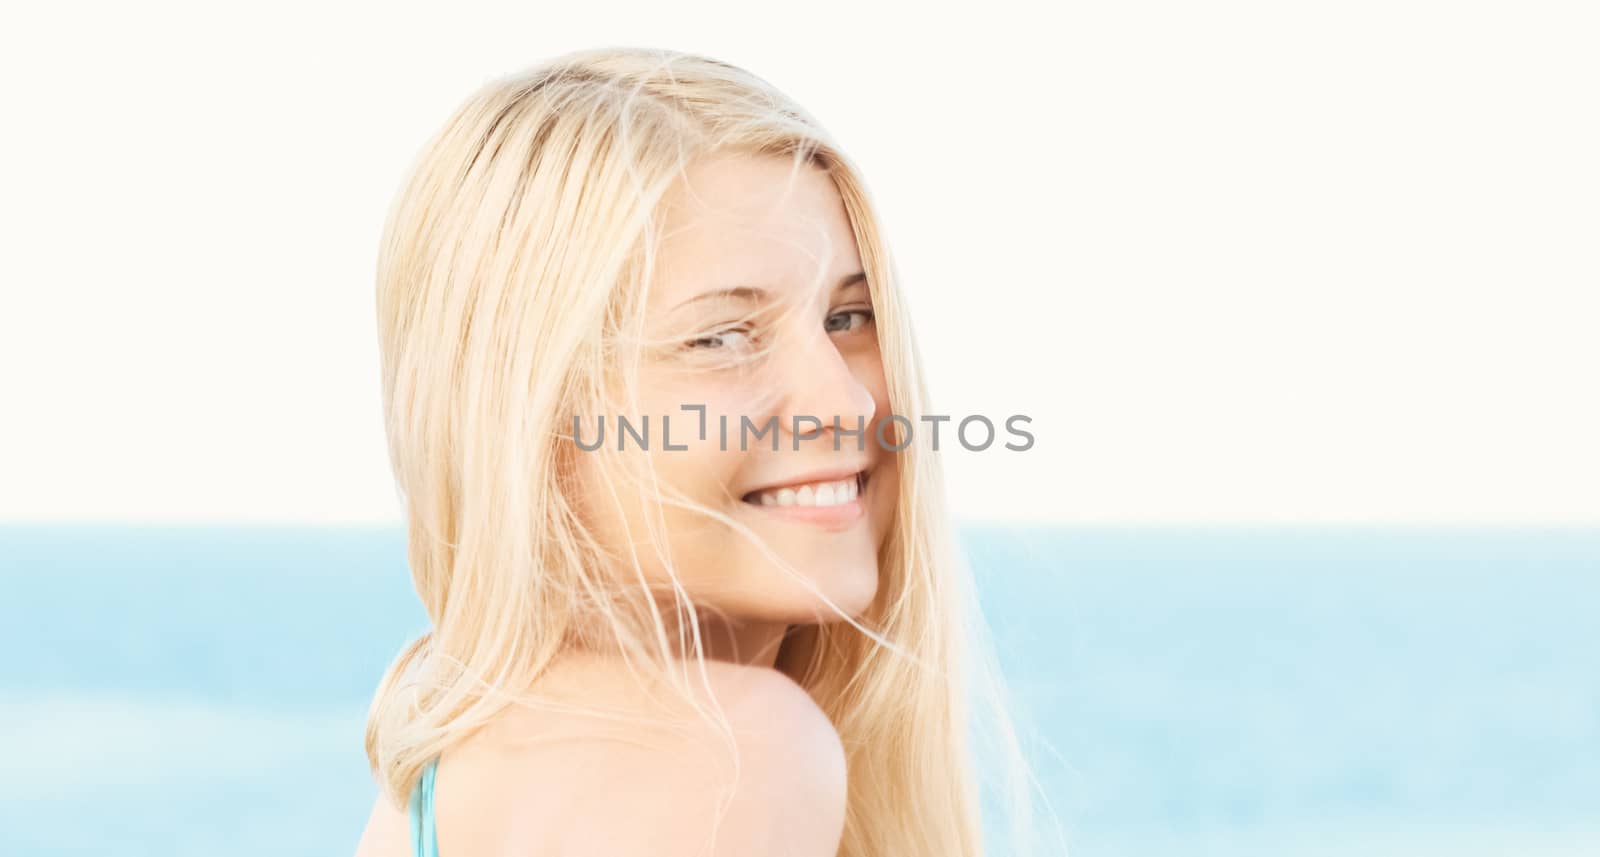 Woman with blond hair enjoying seaside and beach lifestyle in summertime, holiday travel and leisure concept